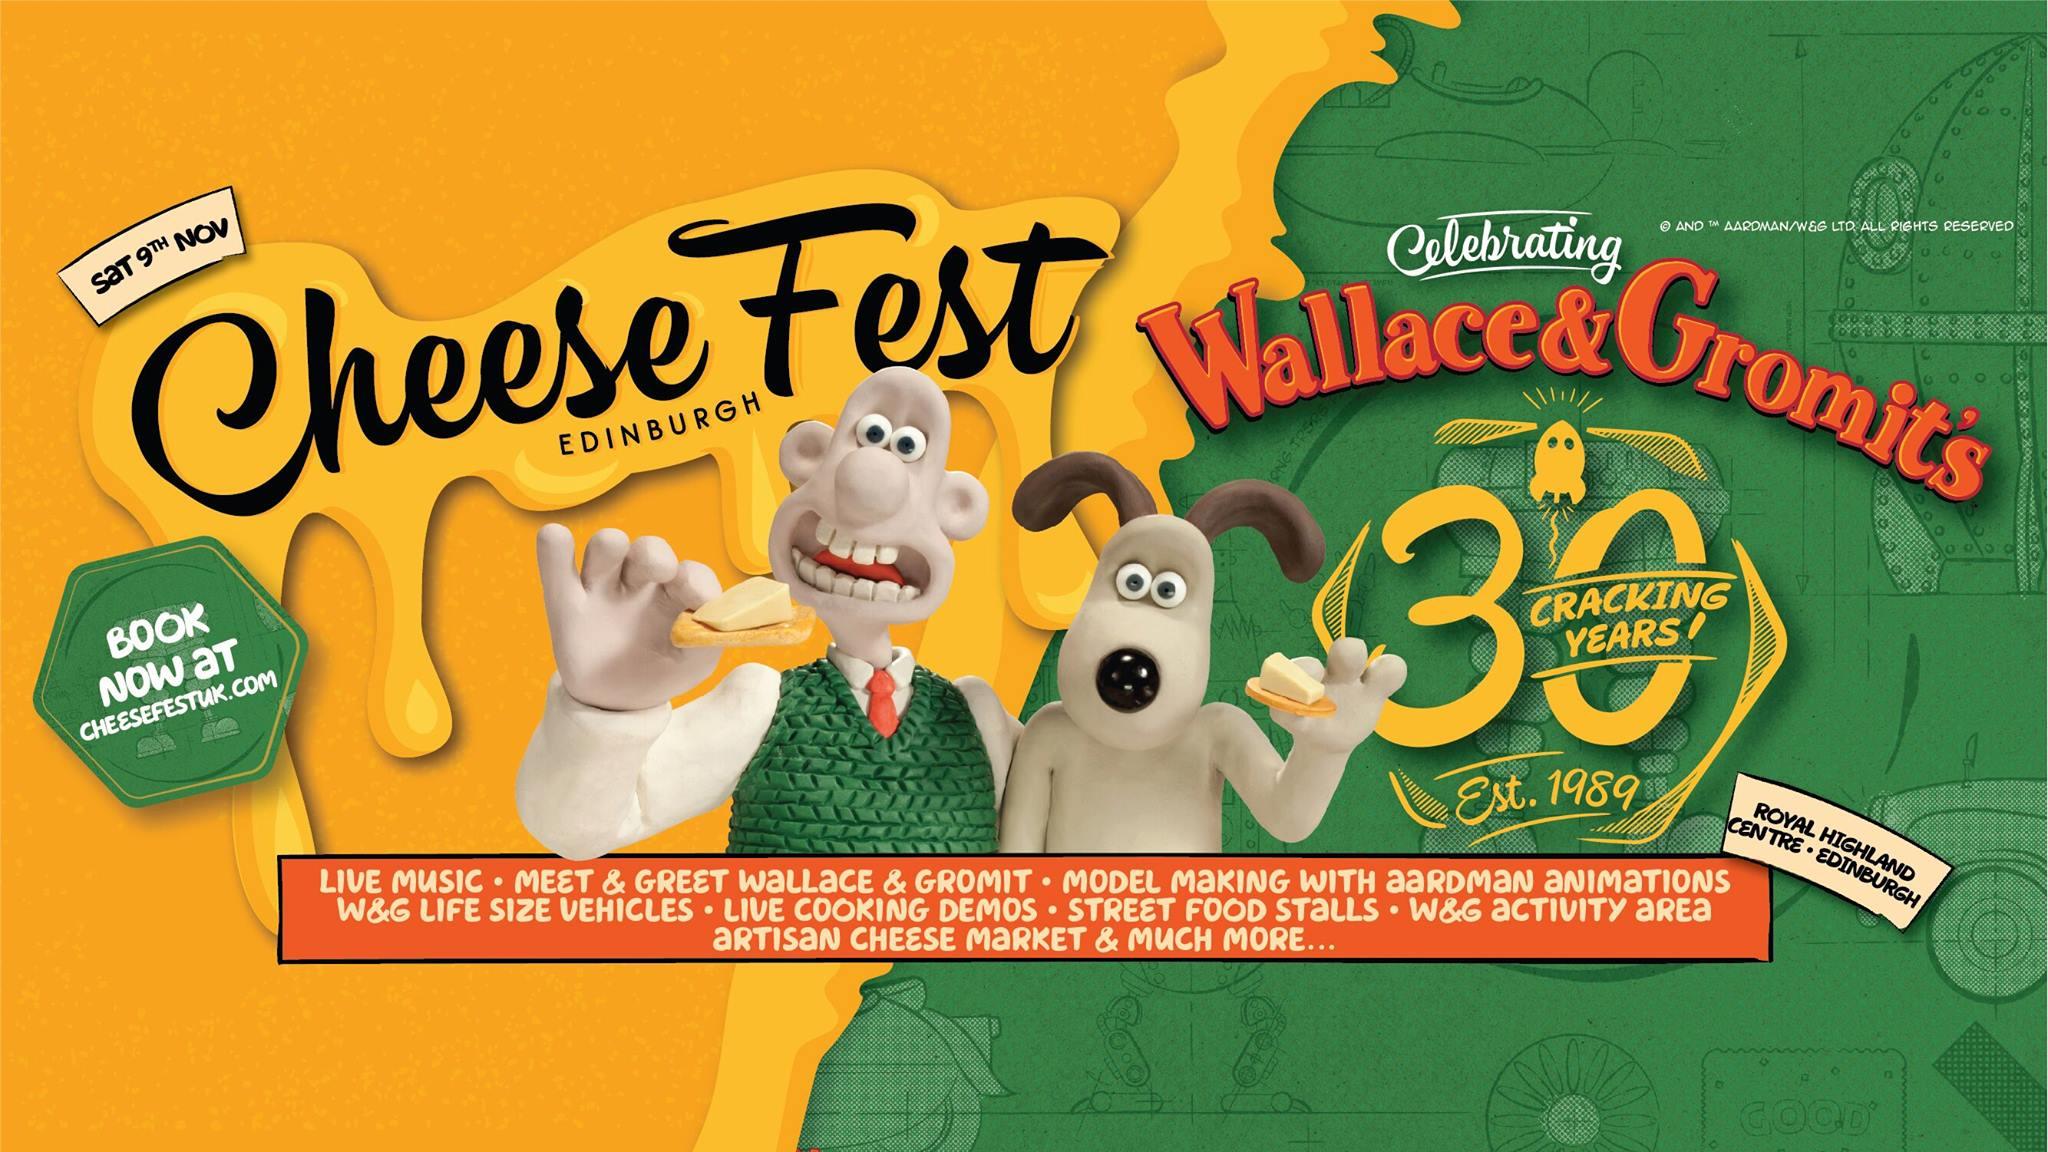 Event Details - Cheese Fest Uk , HD Wallpaper & Backgrounds